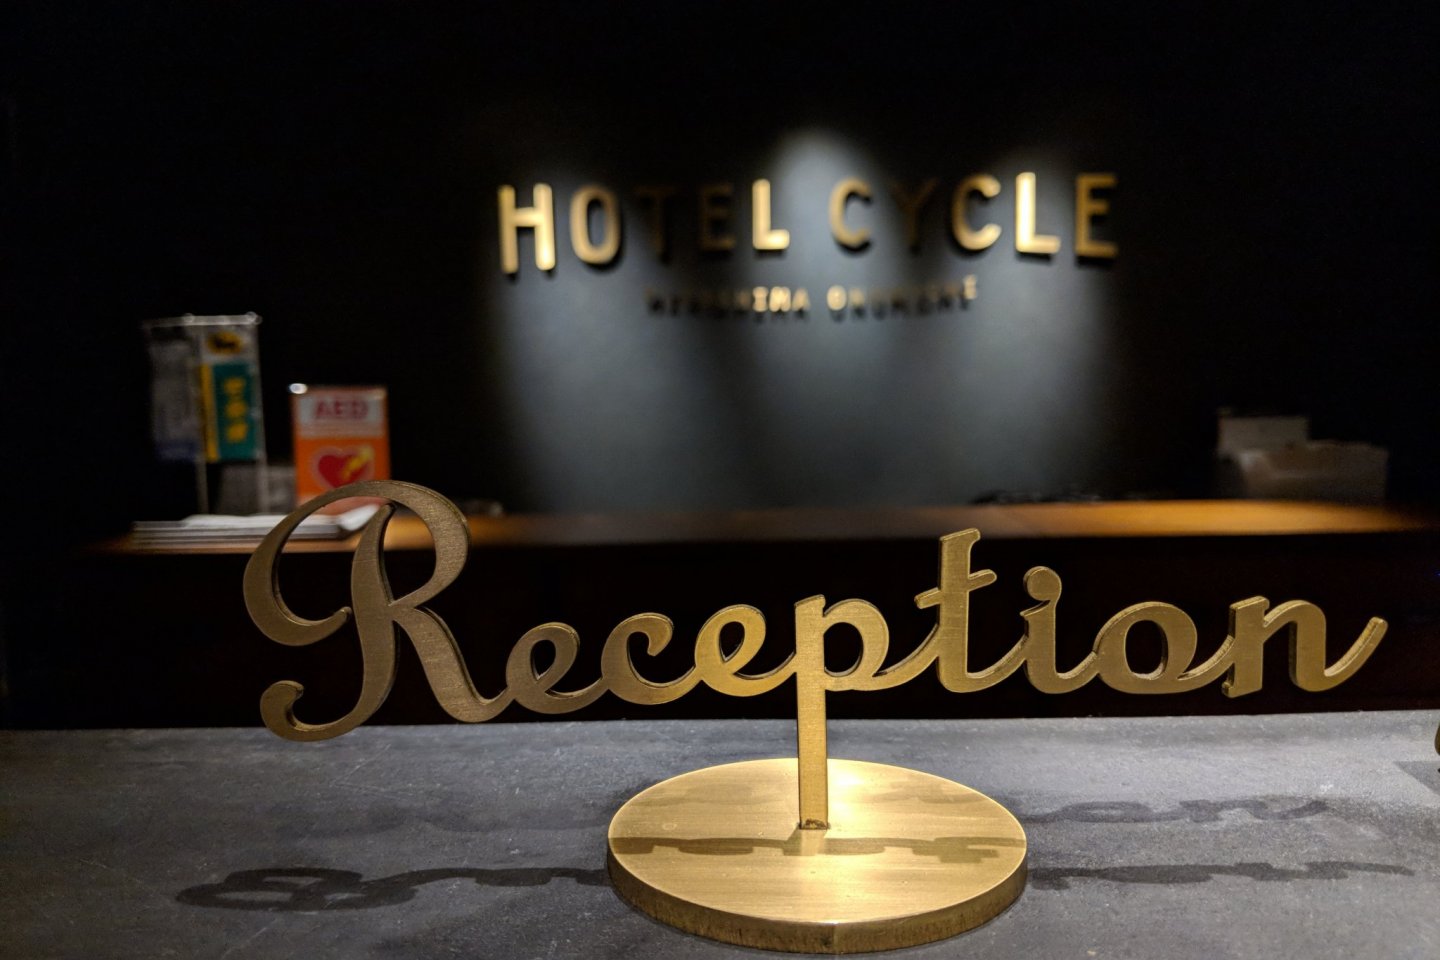 A warm welcome awaits at the reception desk.